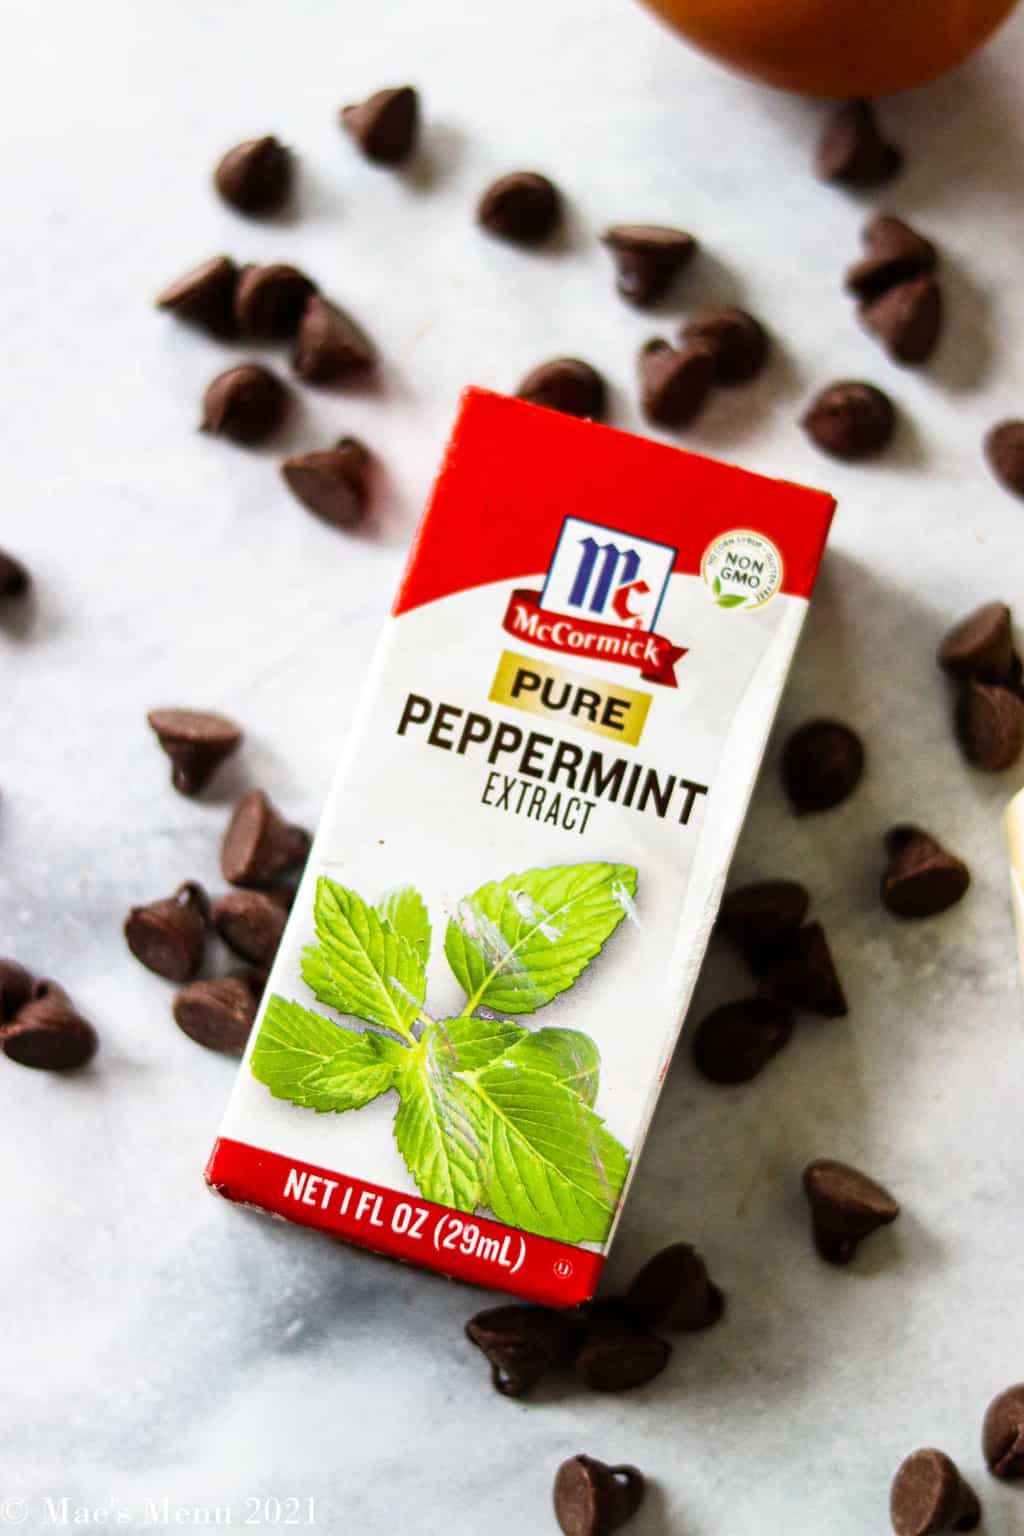 An up-close shot of a box of mccormick pure peppermint